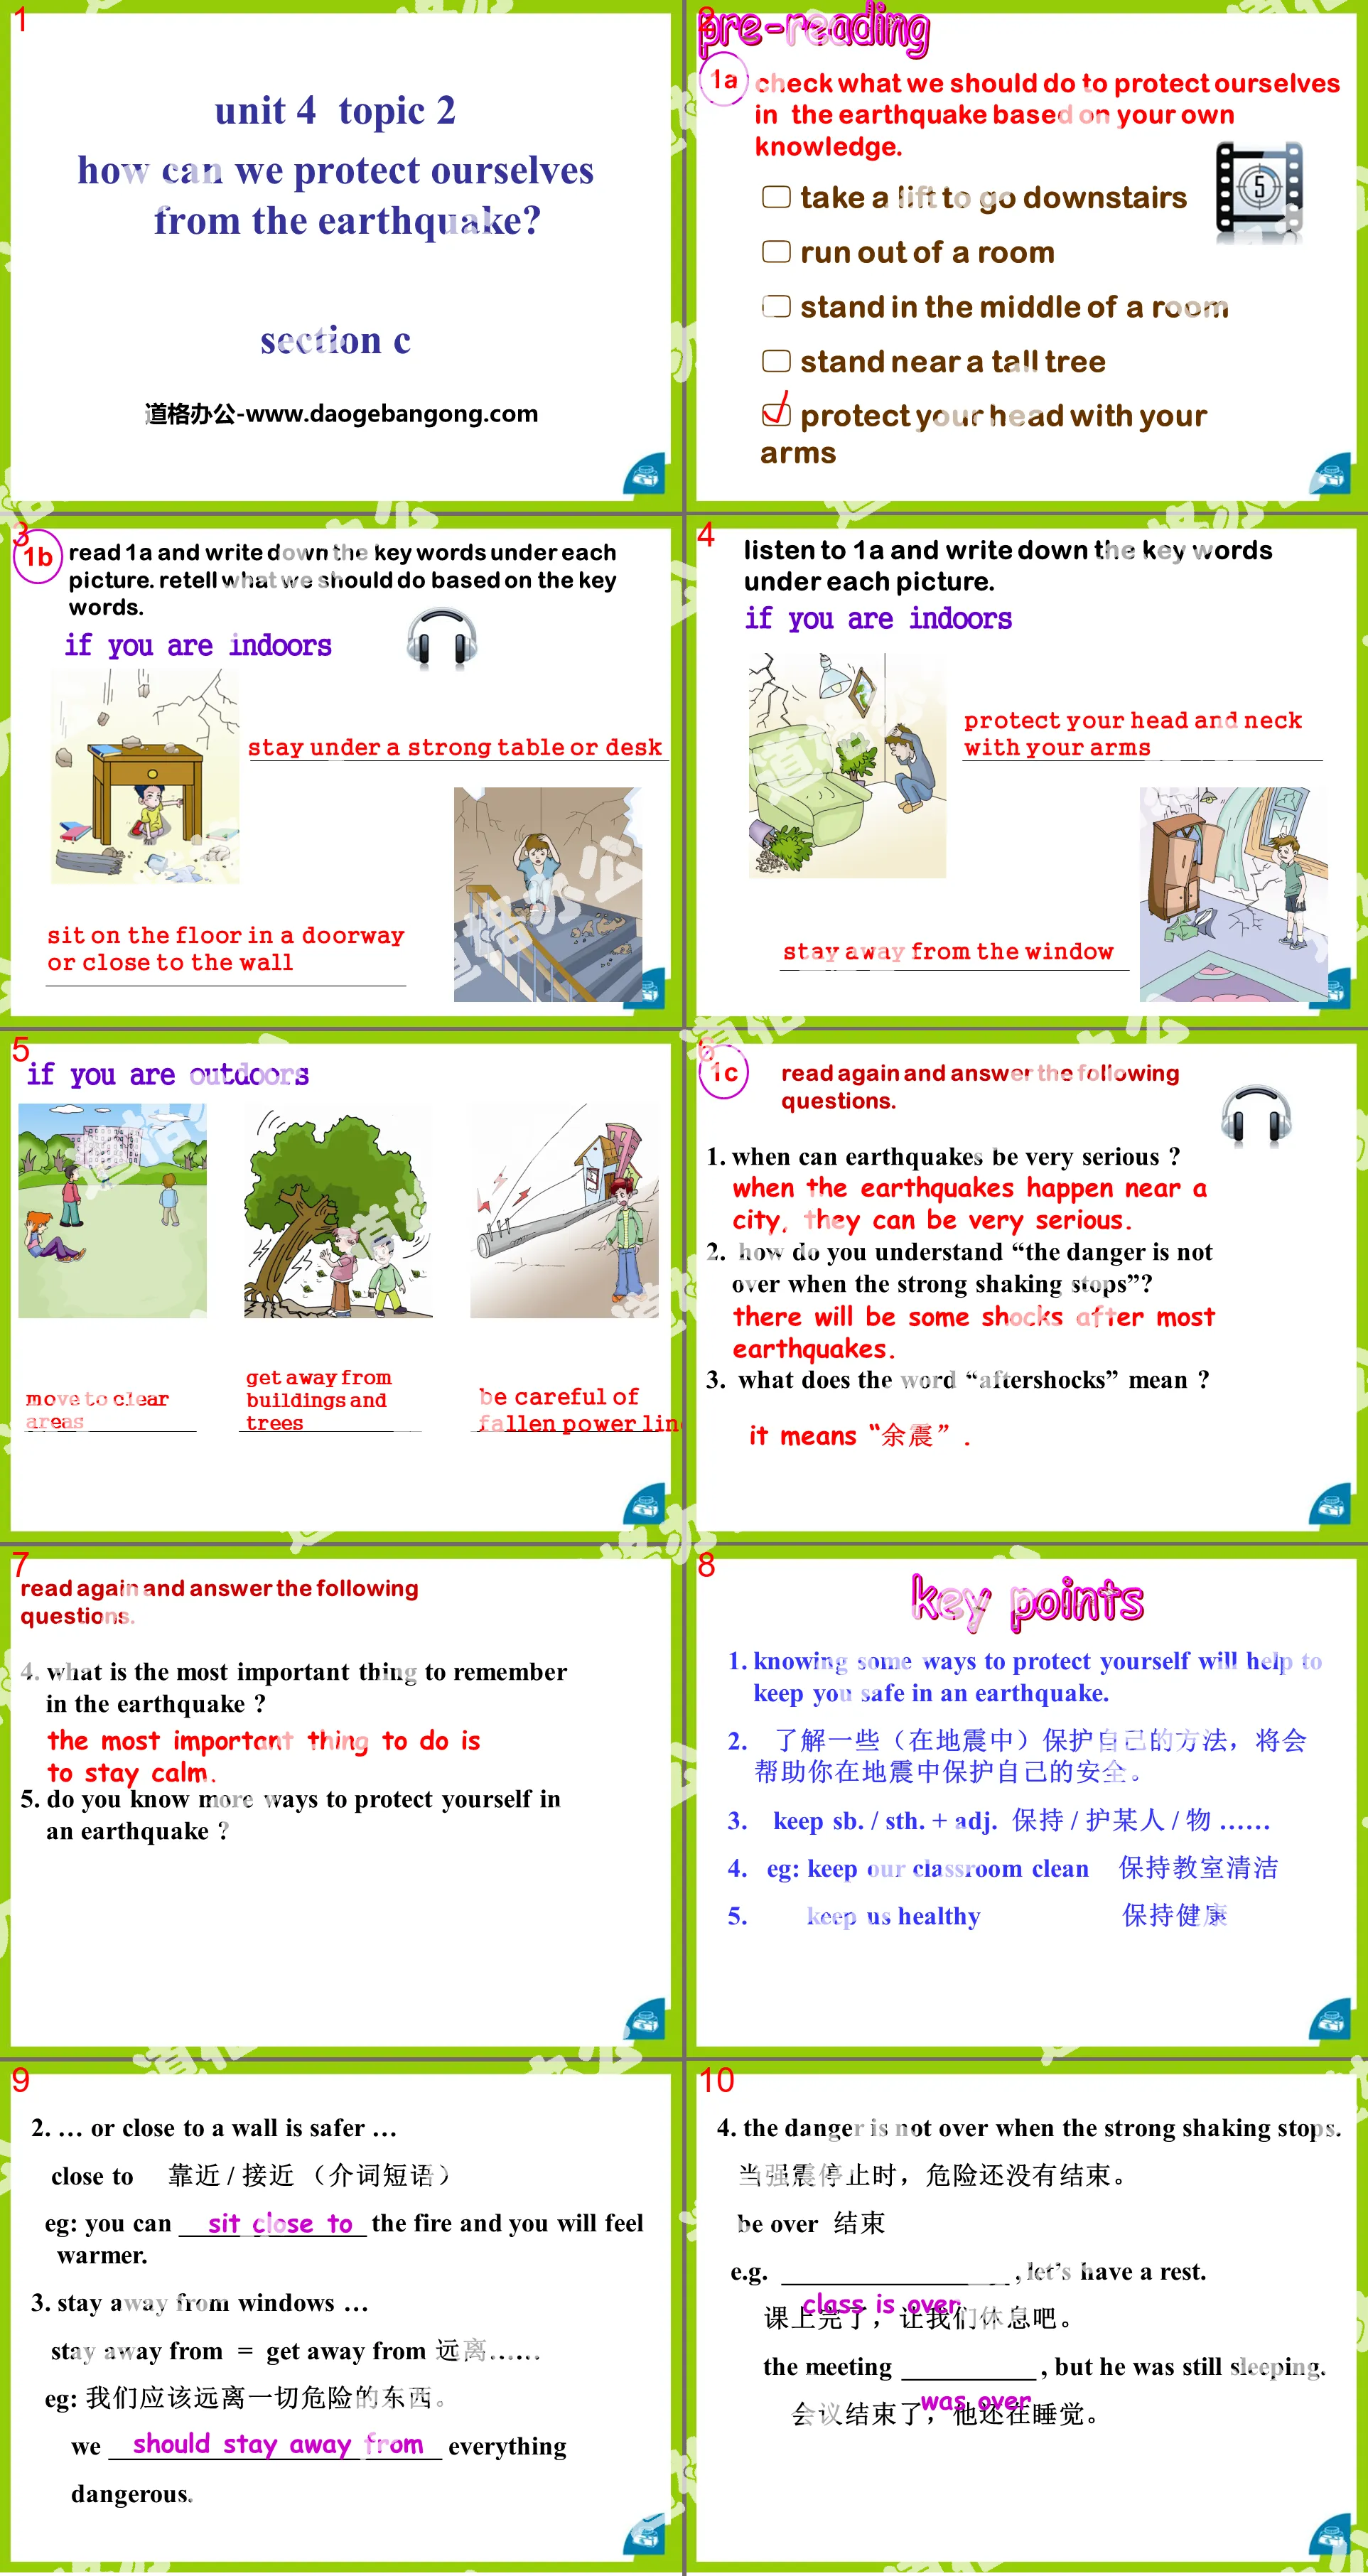 《How can we protect ourselves from the earthquake?》SectionC PPT
